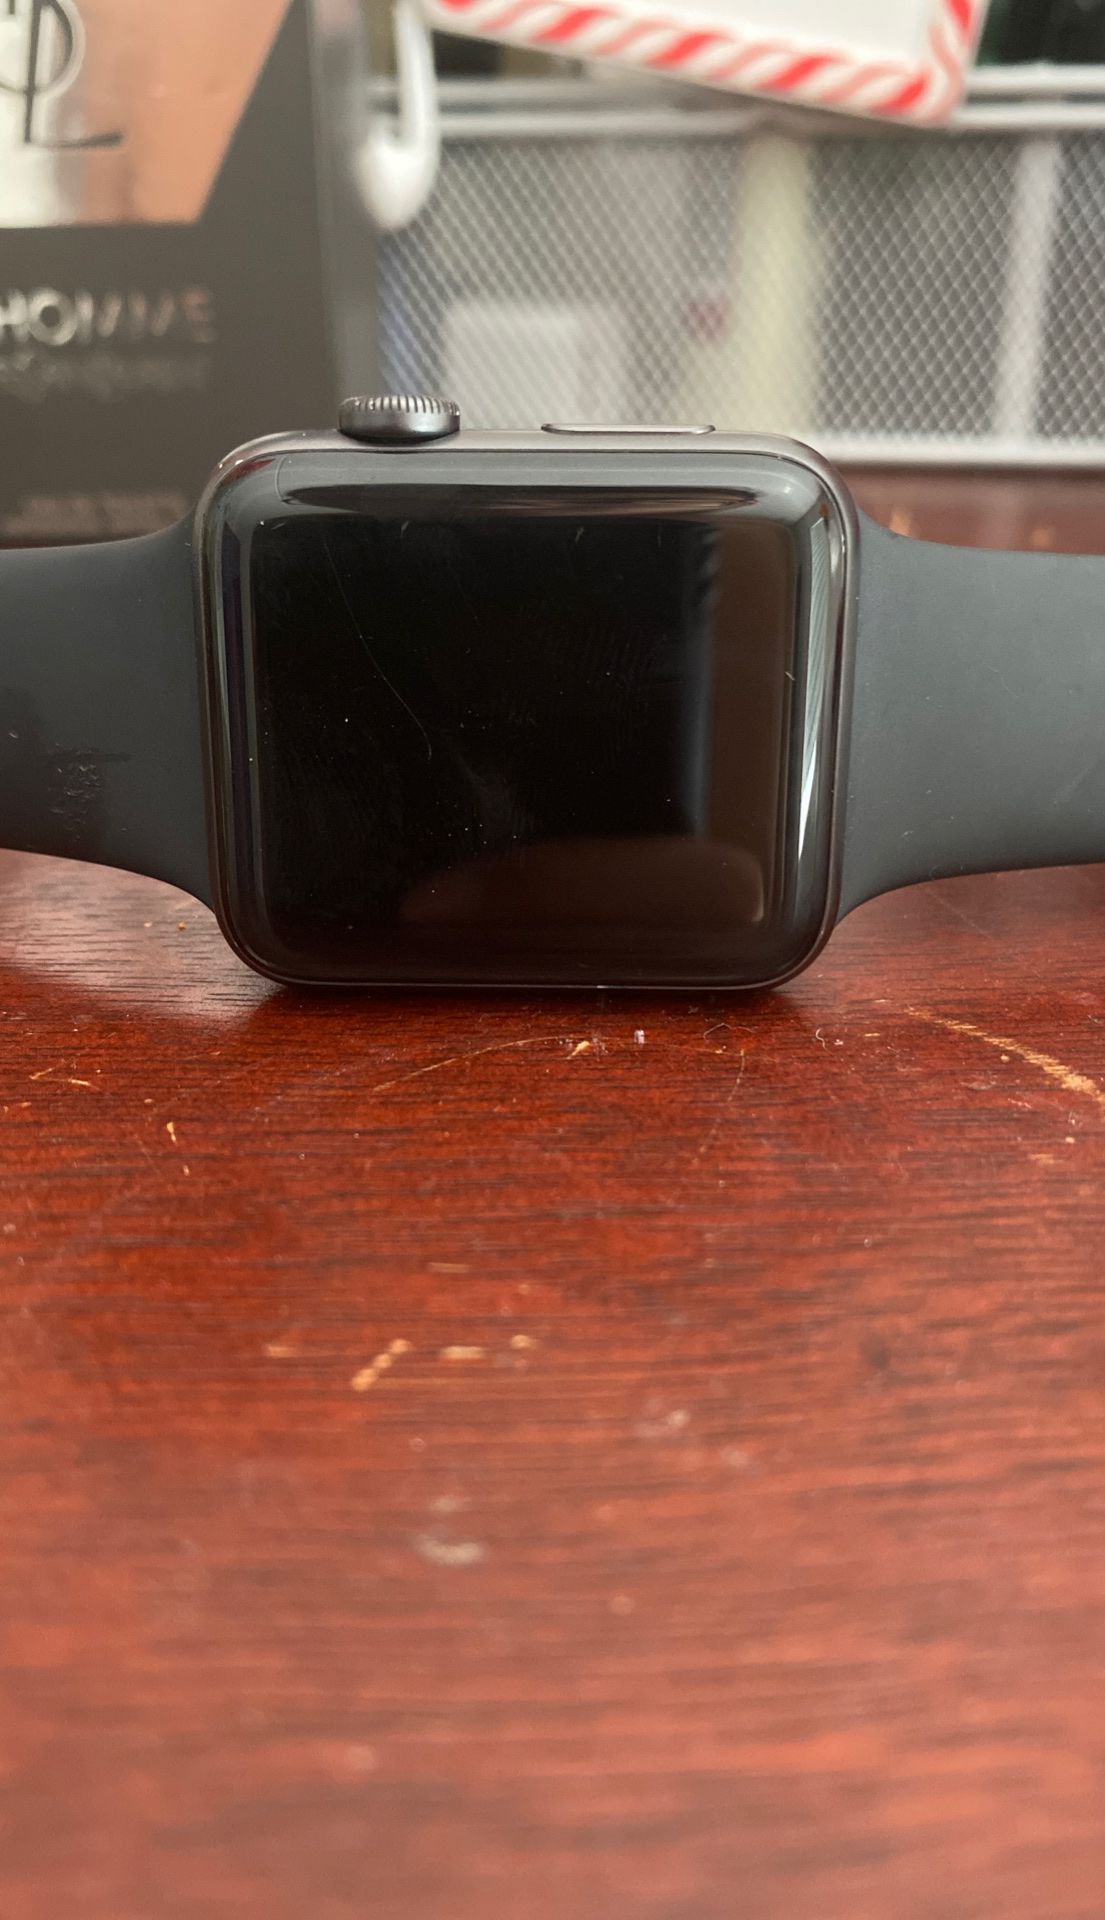 Apple Watch series 3, 42mm with charger and box